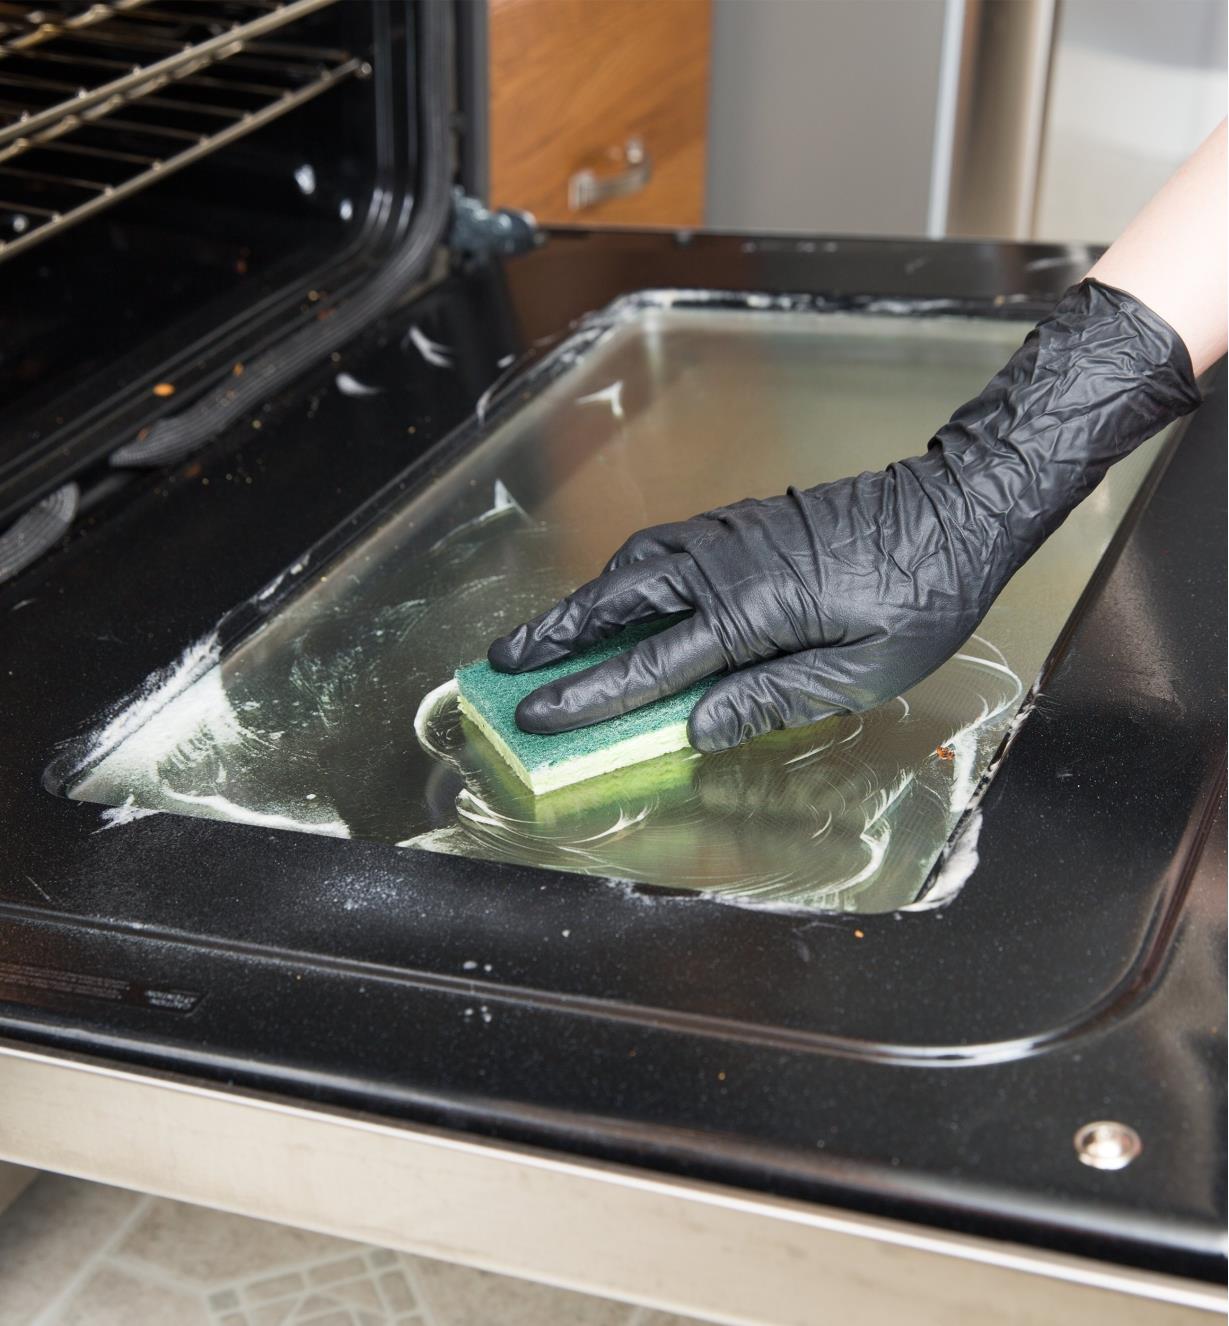 Wearing Grease Monkey Nitrile Gloves while cleaning an oven door